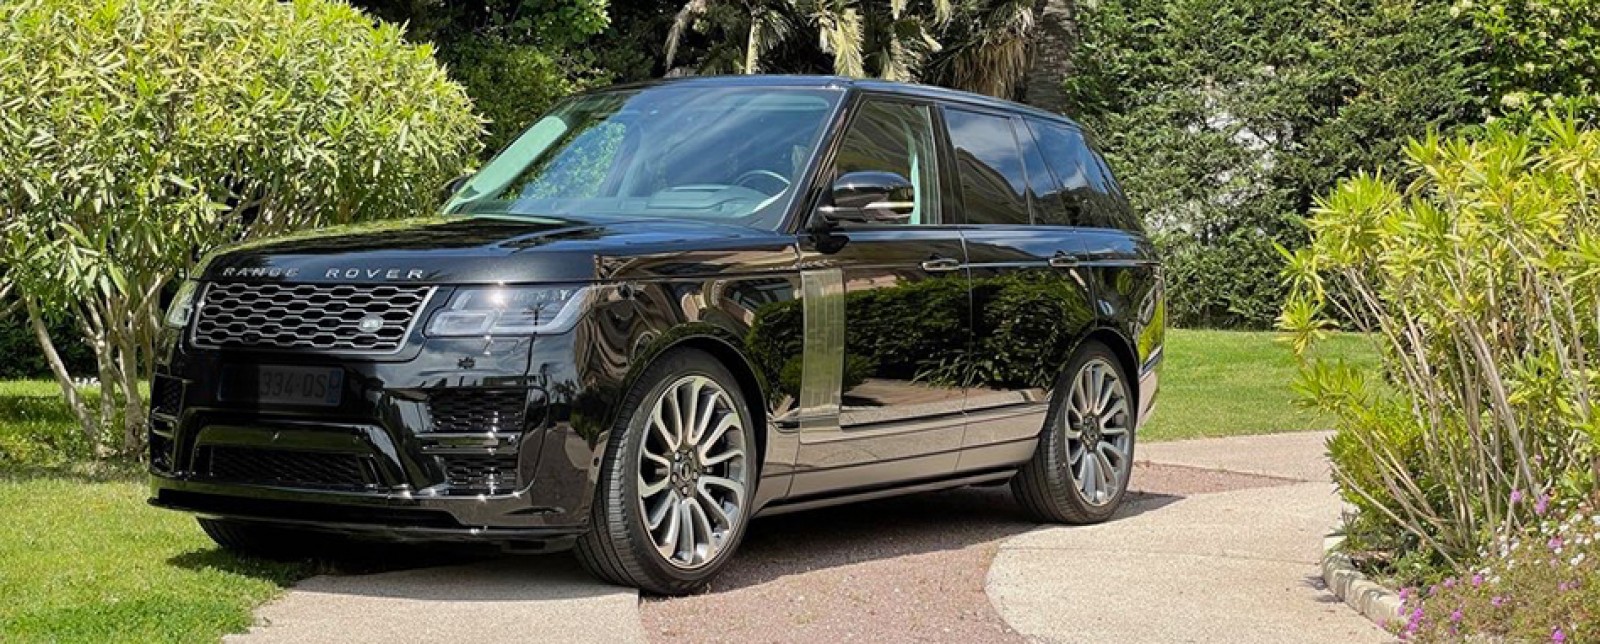 Private Chauffeur in Courchevel - Premium Vehicles & Services - Reactivity 24/7 - Ruby Services - Car Rental with Driver in Courchevel - Range Rover